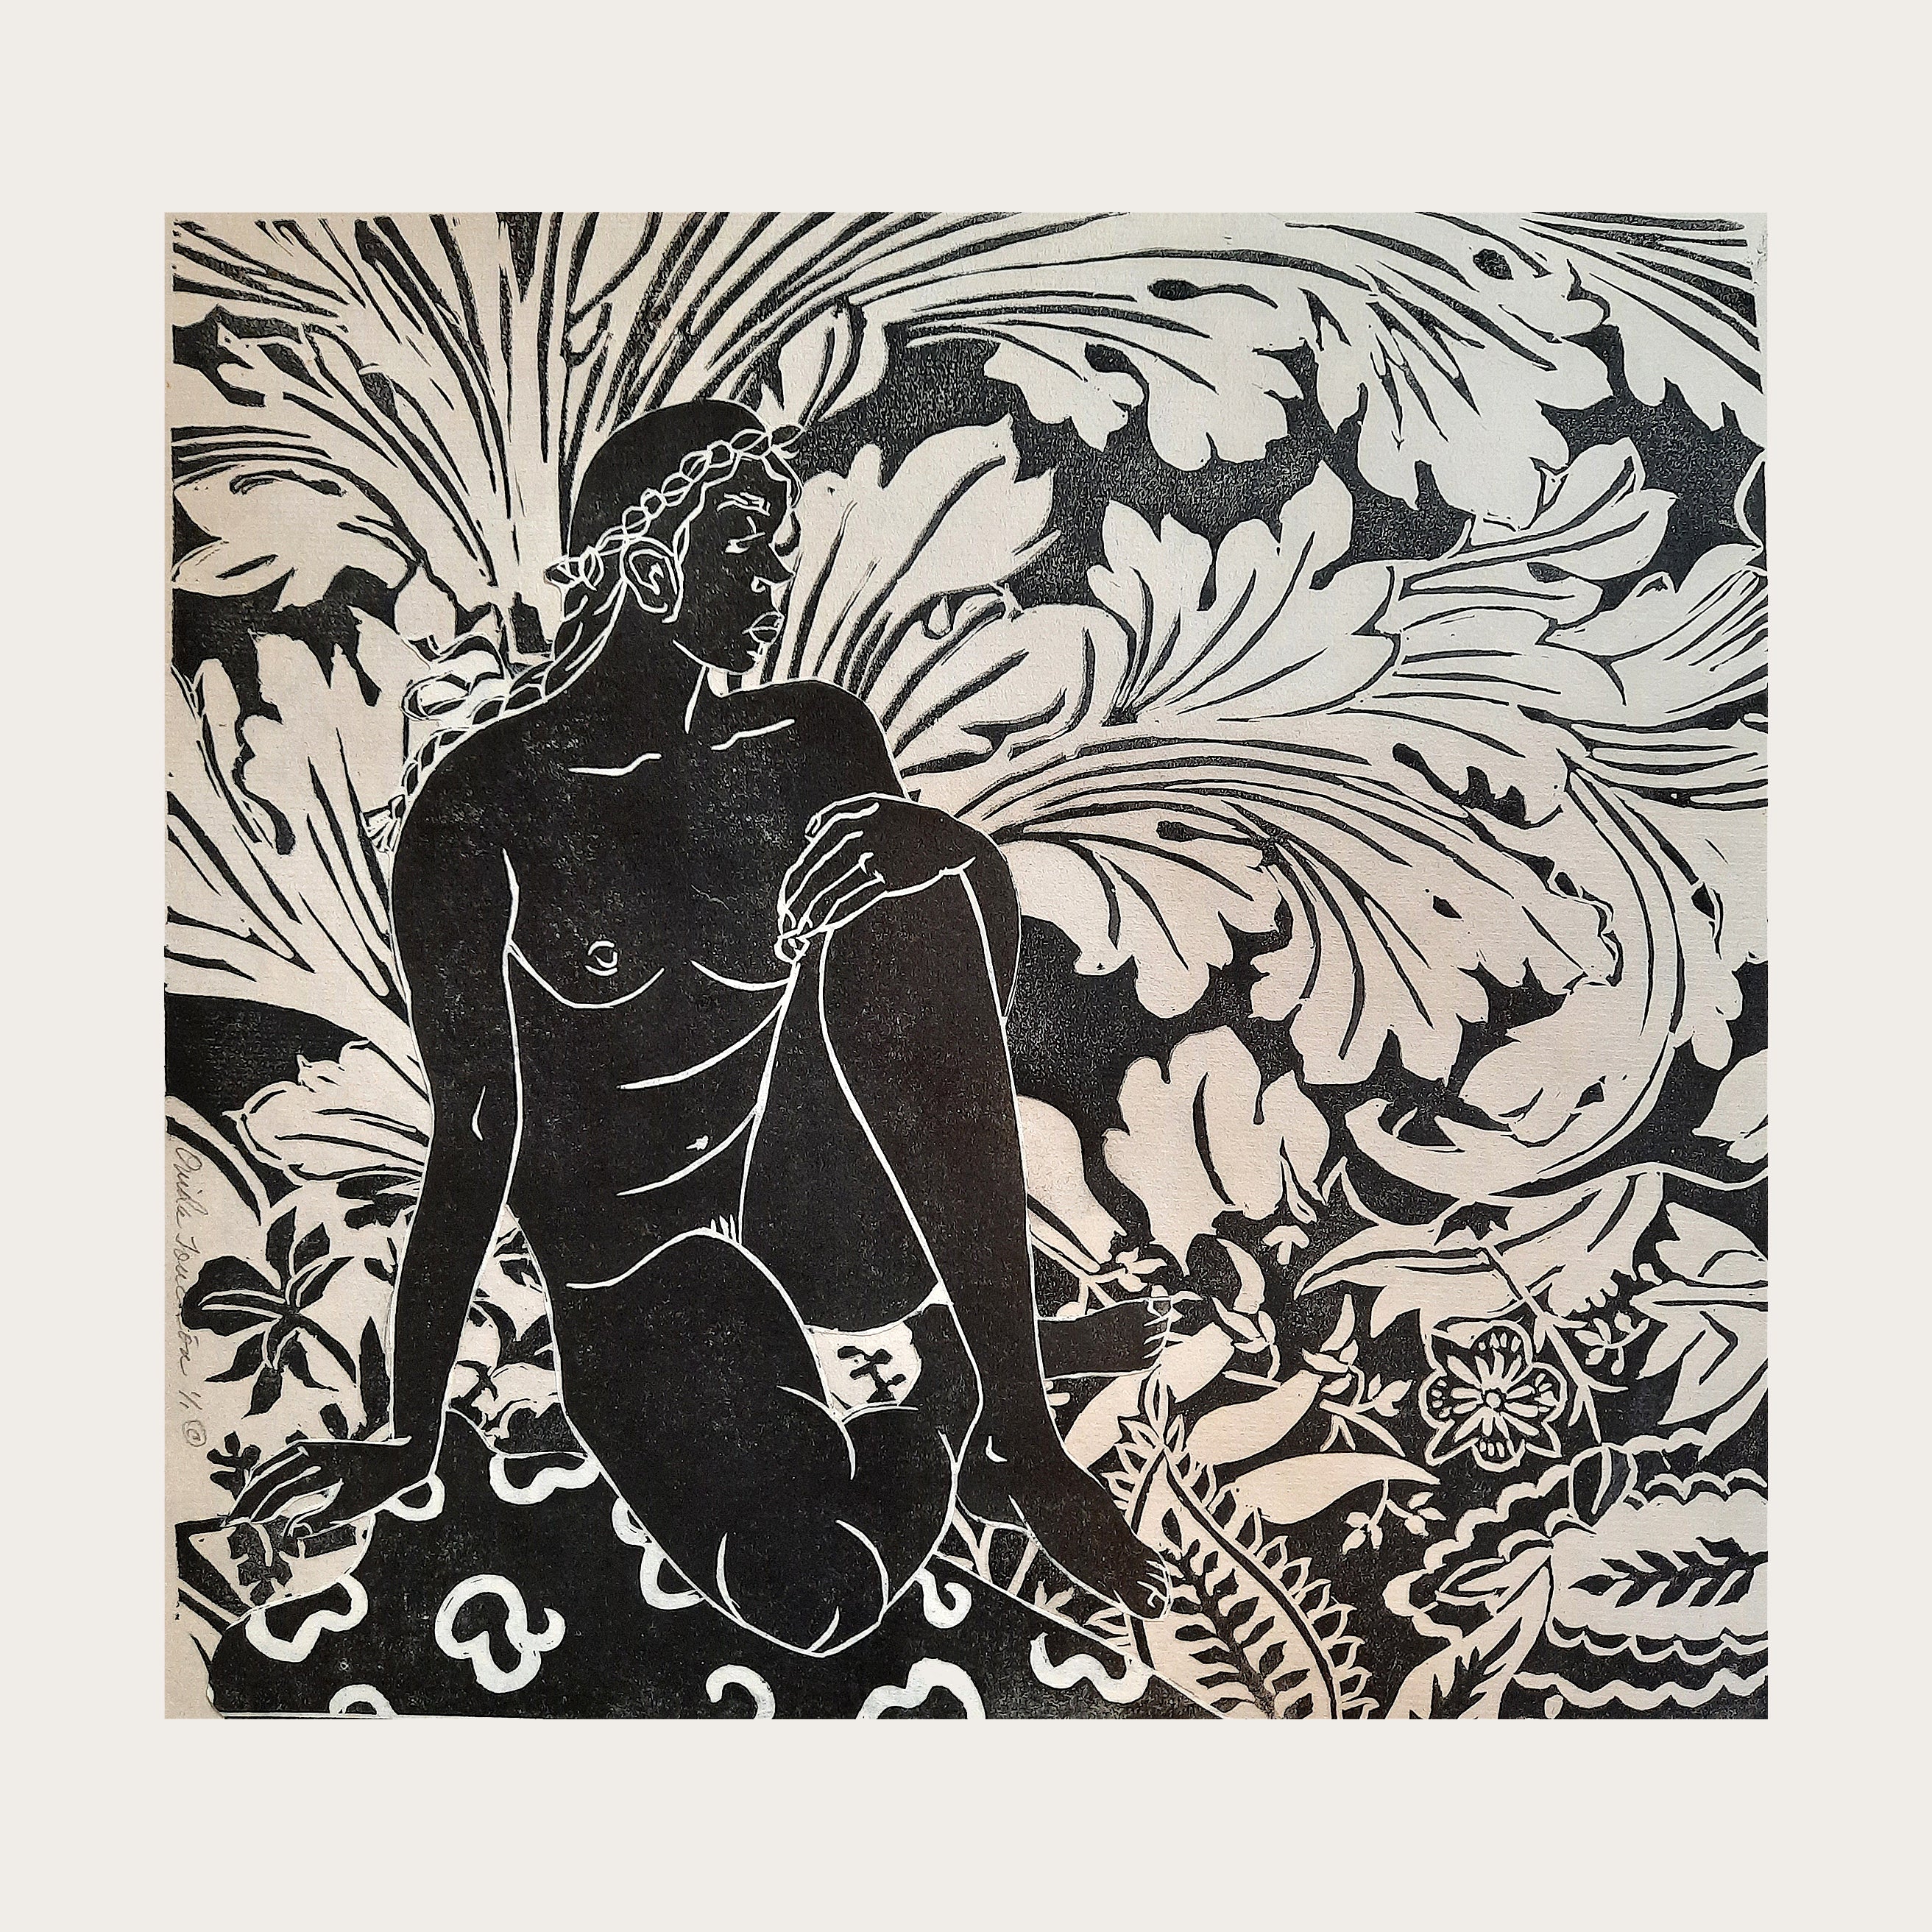 Tahitian Goddess, linocut combination print edition of 10 for sale by Ouida Touchon